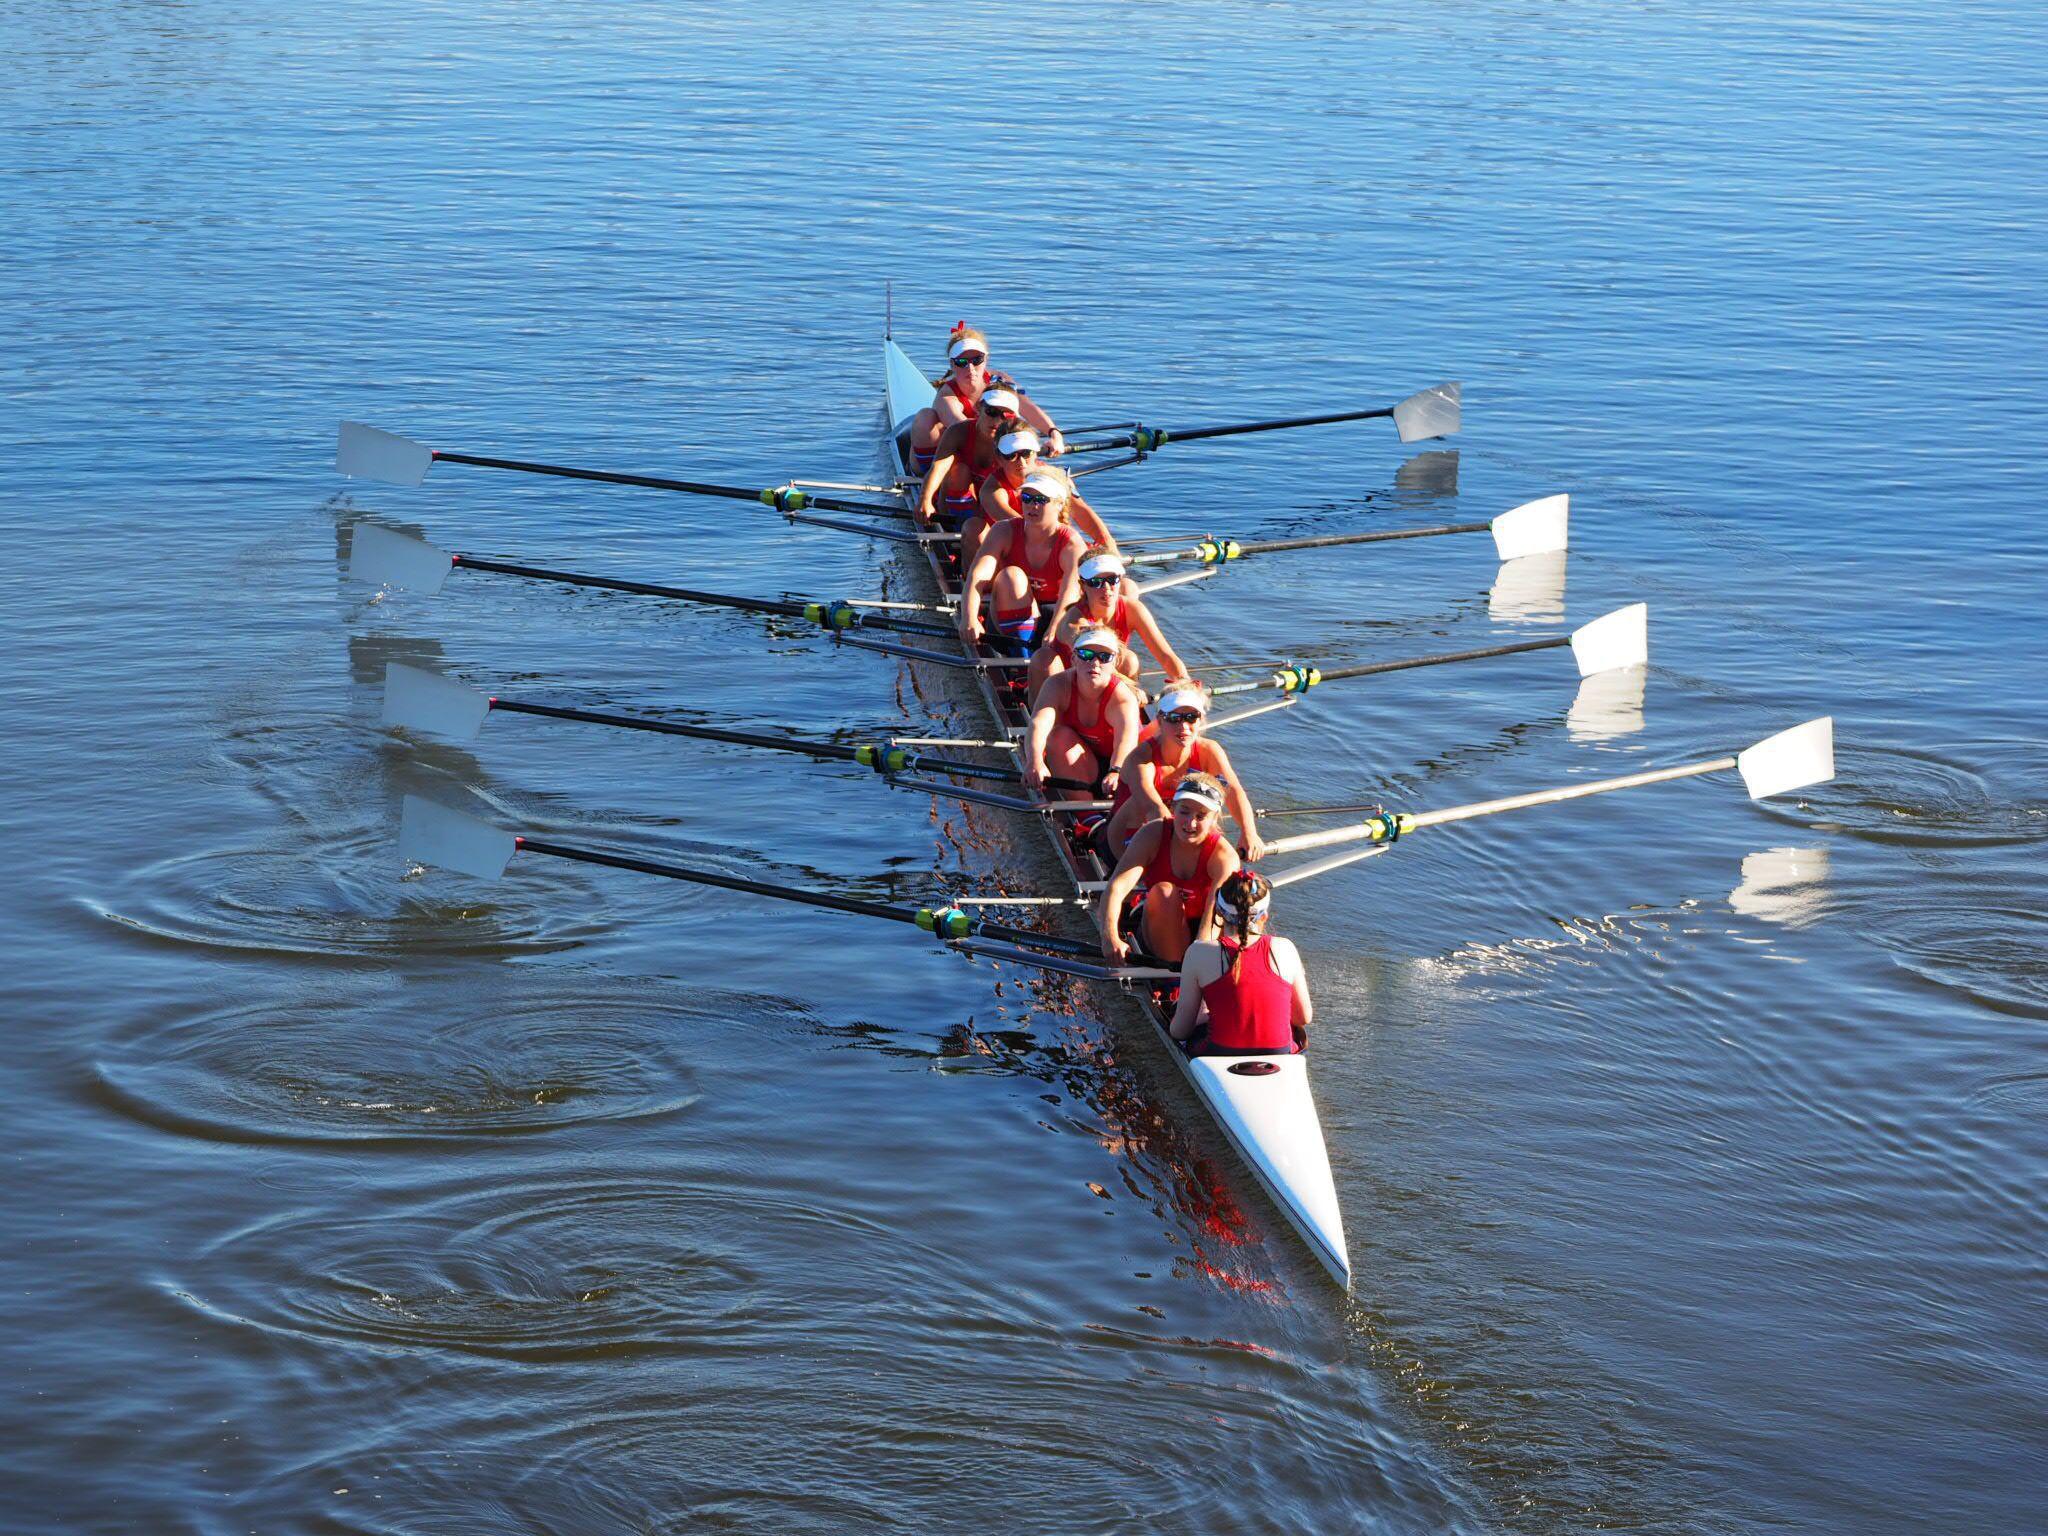 Rowing Free HD Wallpaper Image Background